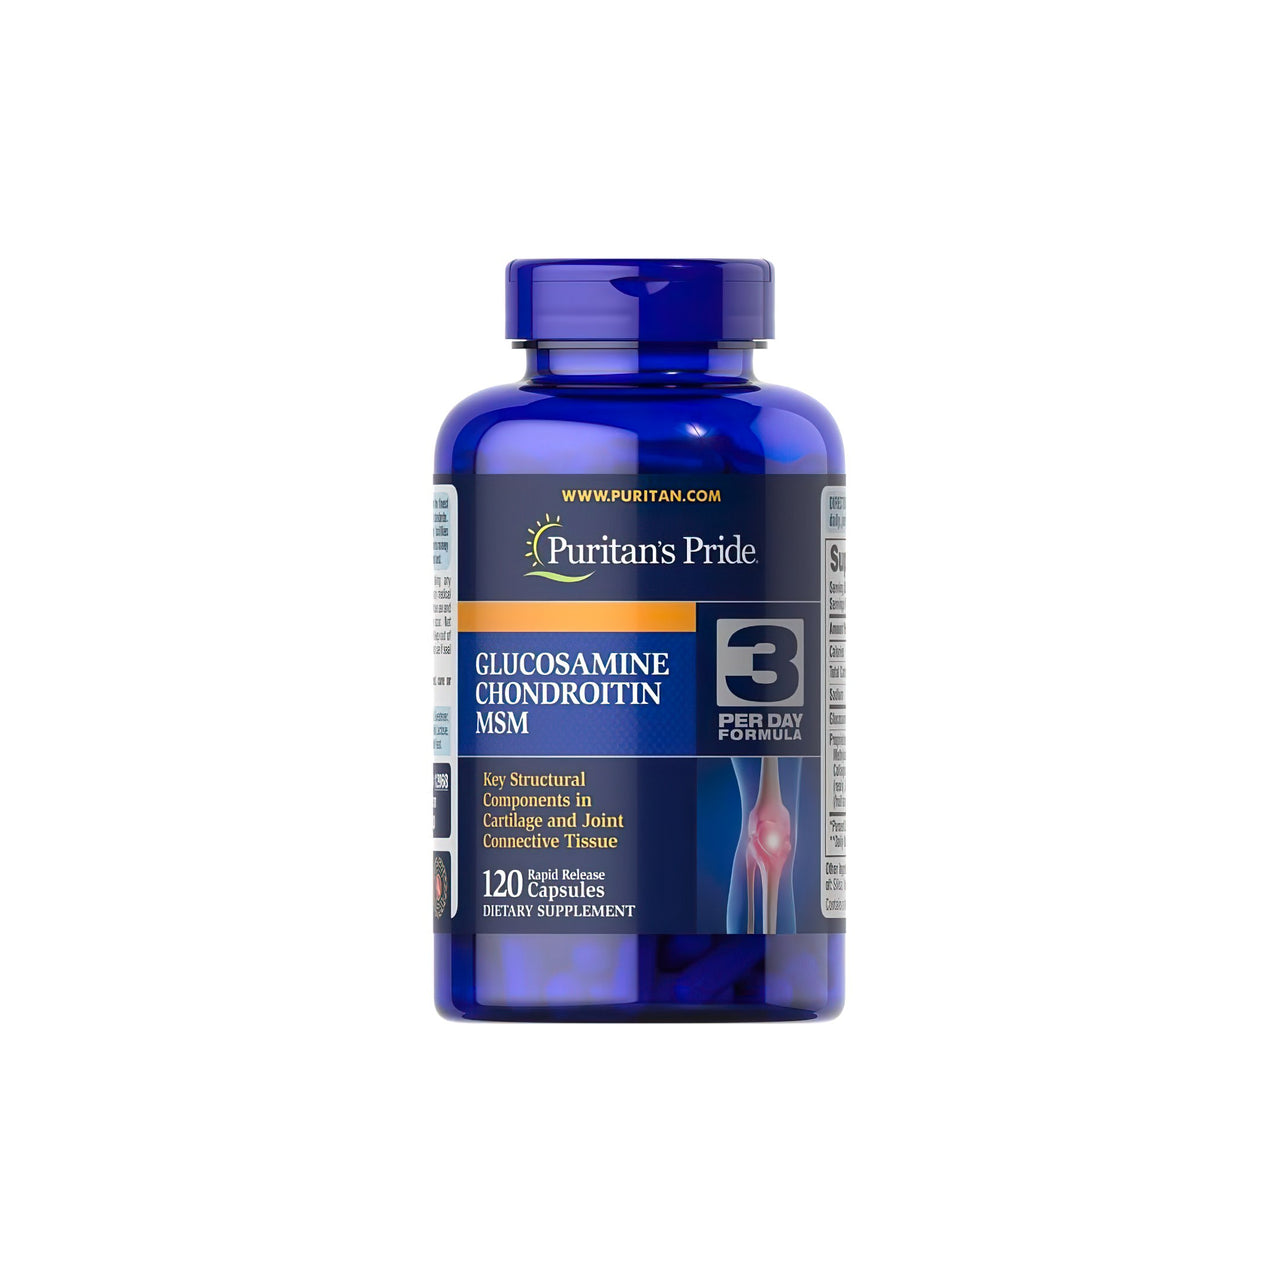 A bottle of Glucosamine Chondroitin MSM 120 capsules by Puritan's Pride.